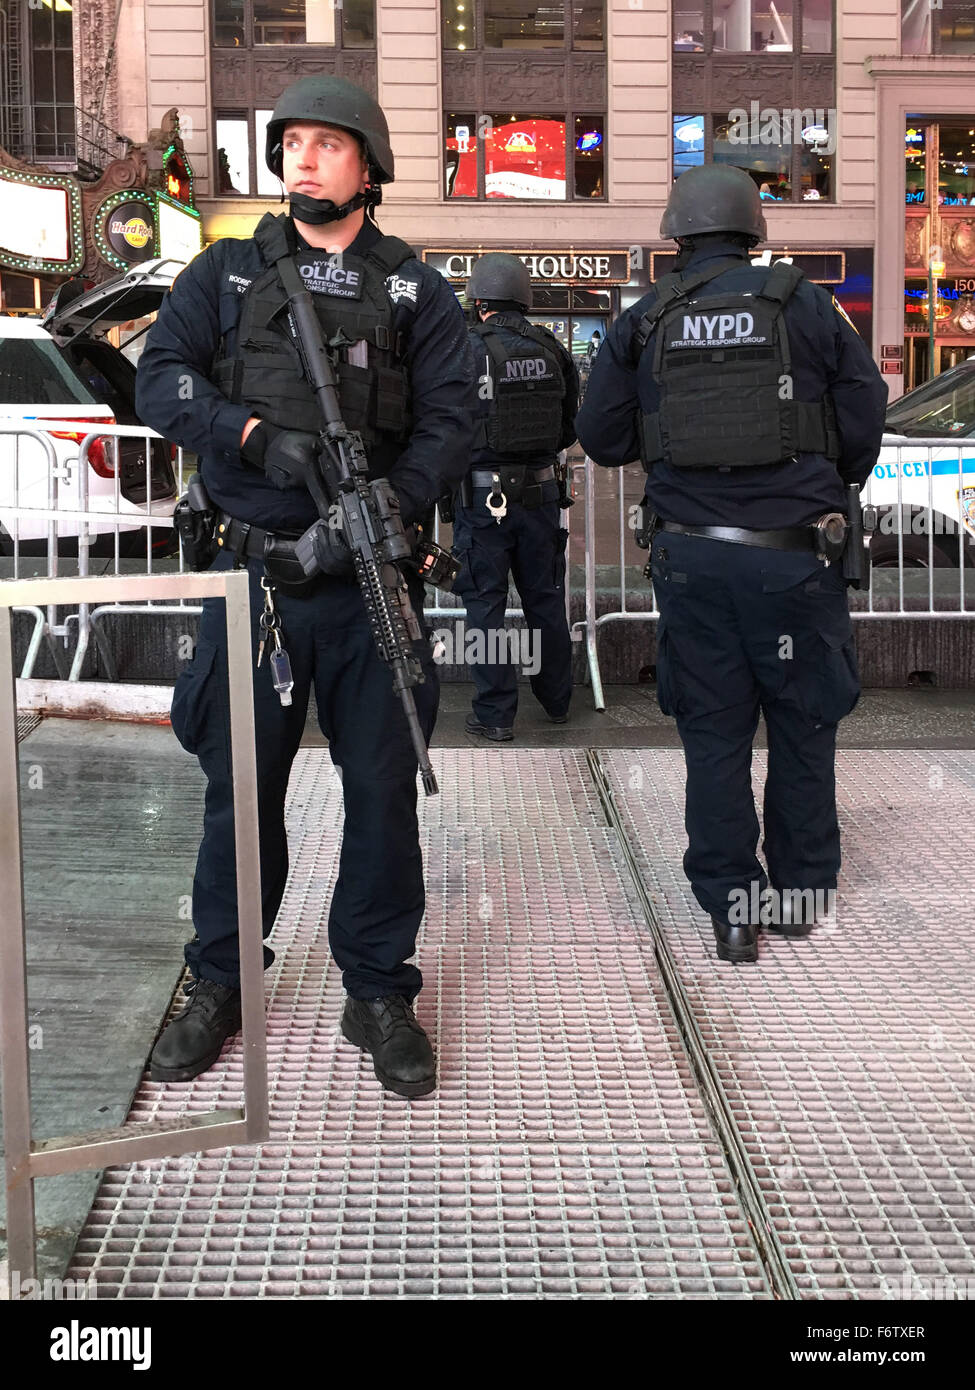 New York City, New York, USA. 19th Nov, 2015. Strategic Response Group members are stationed in midtown Manhattan, including at the U.S. Armed Forces Career Center in Times Square, the day after an ISIS propoganda video came out threatening New York City, particularly Times Square. NYC's Mayor and Police Commissioner both said there is no specific and credible threat against New York City. Credit:  Ann Parry/ZUMA Wire/Alamy Live News Stock Photo